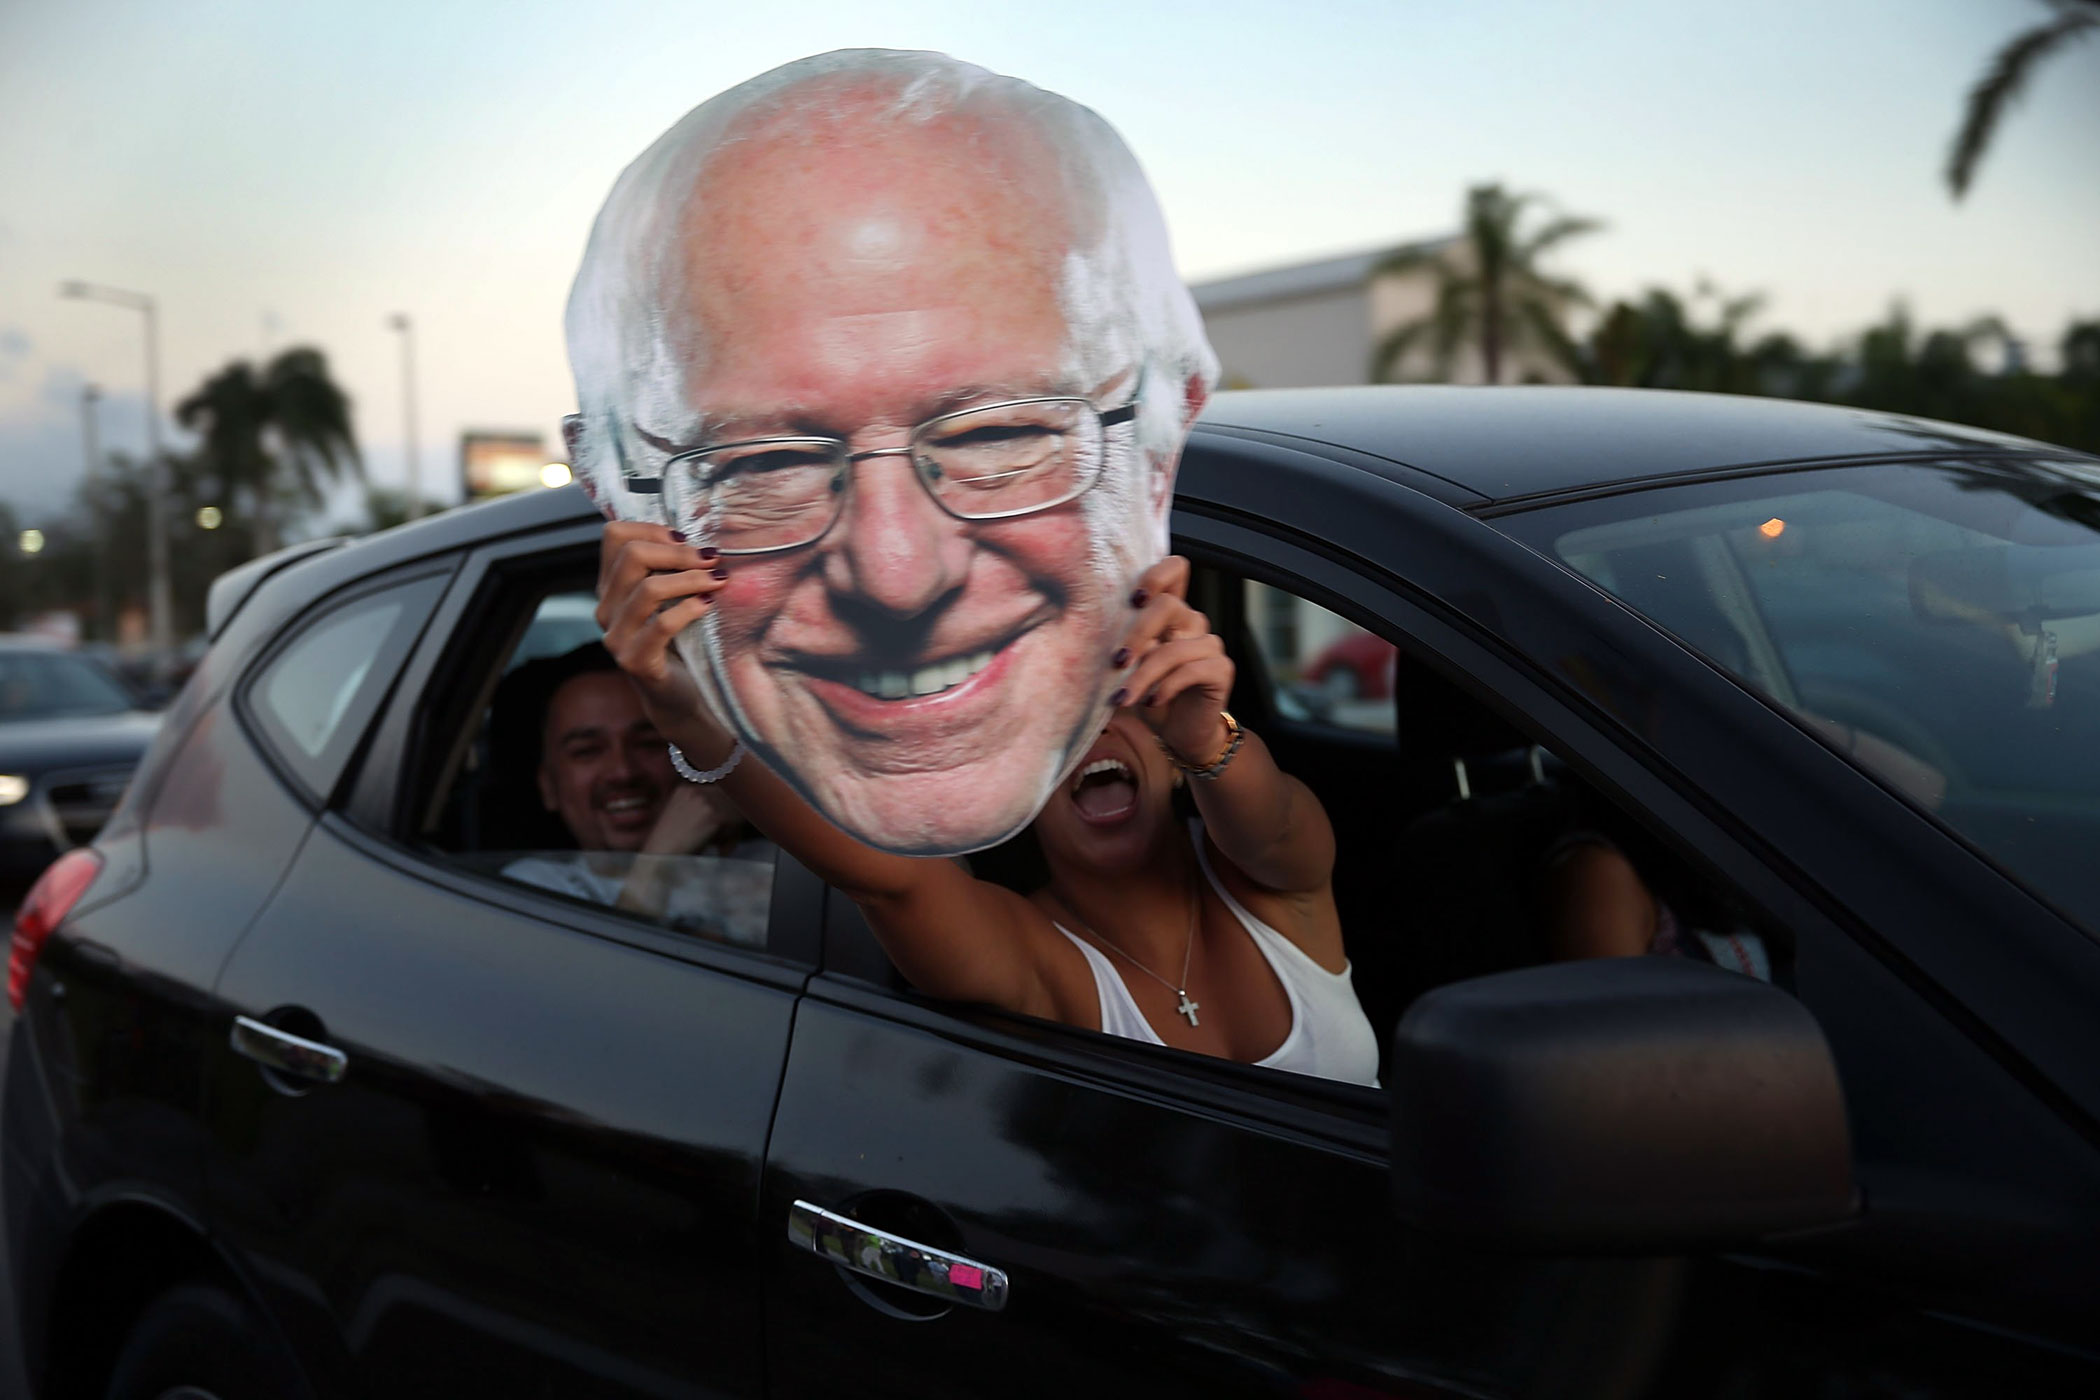 Supporters of Democratic presidential candidate, Vermont Sen. Bernie Sanders hold a cutout before a debate between Democratic presidential candidates Hillary Clinton and Bernie Sanders in Kendall, Fla. on March 9.